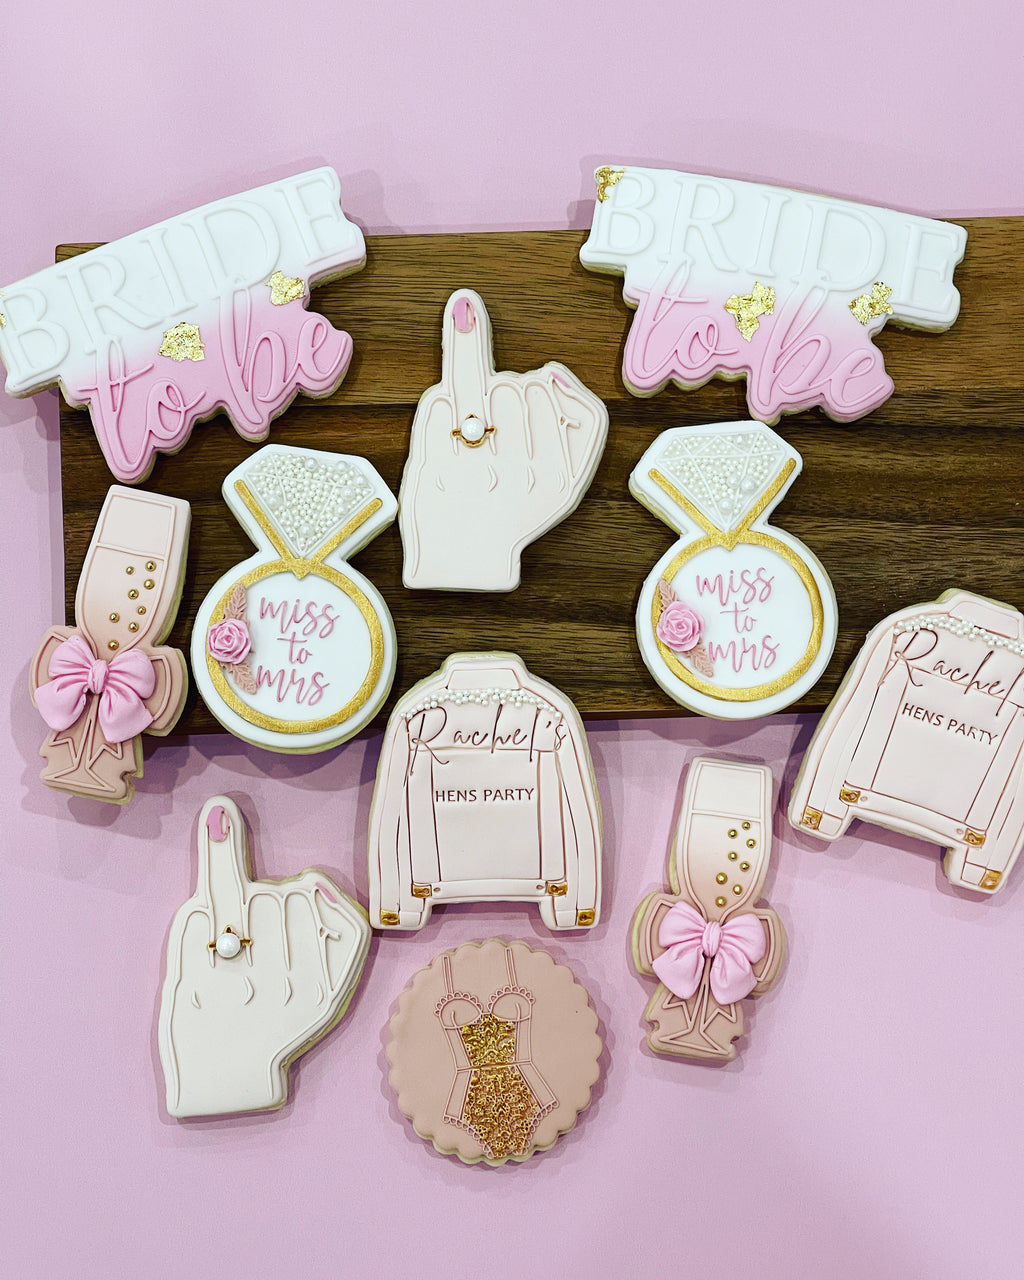 Personalised Wedding Cookies with Bride to Be Cookie, White Finger Cookie and Champagne Flute Cookie